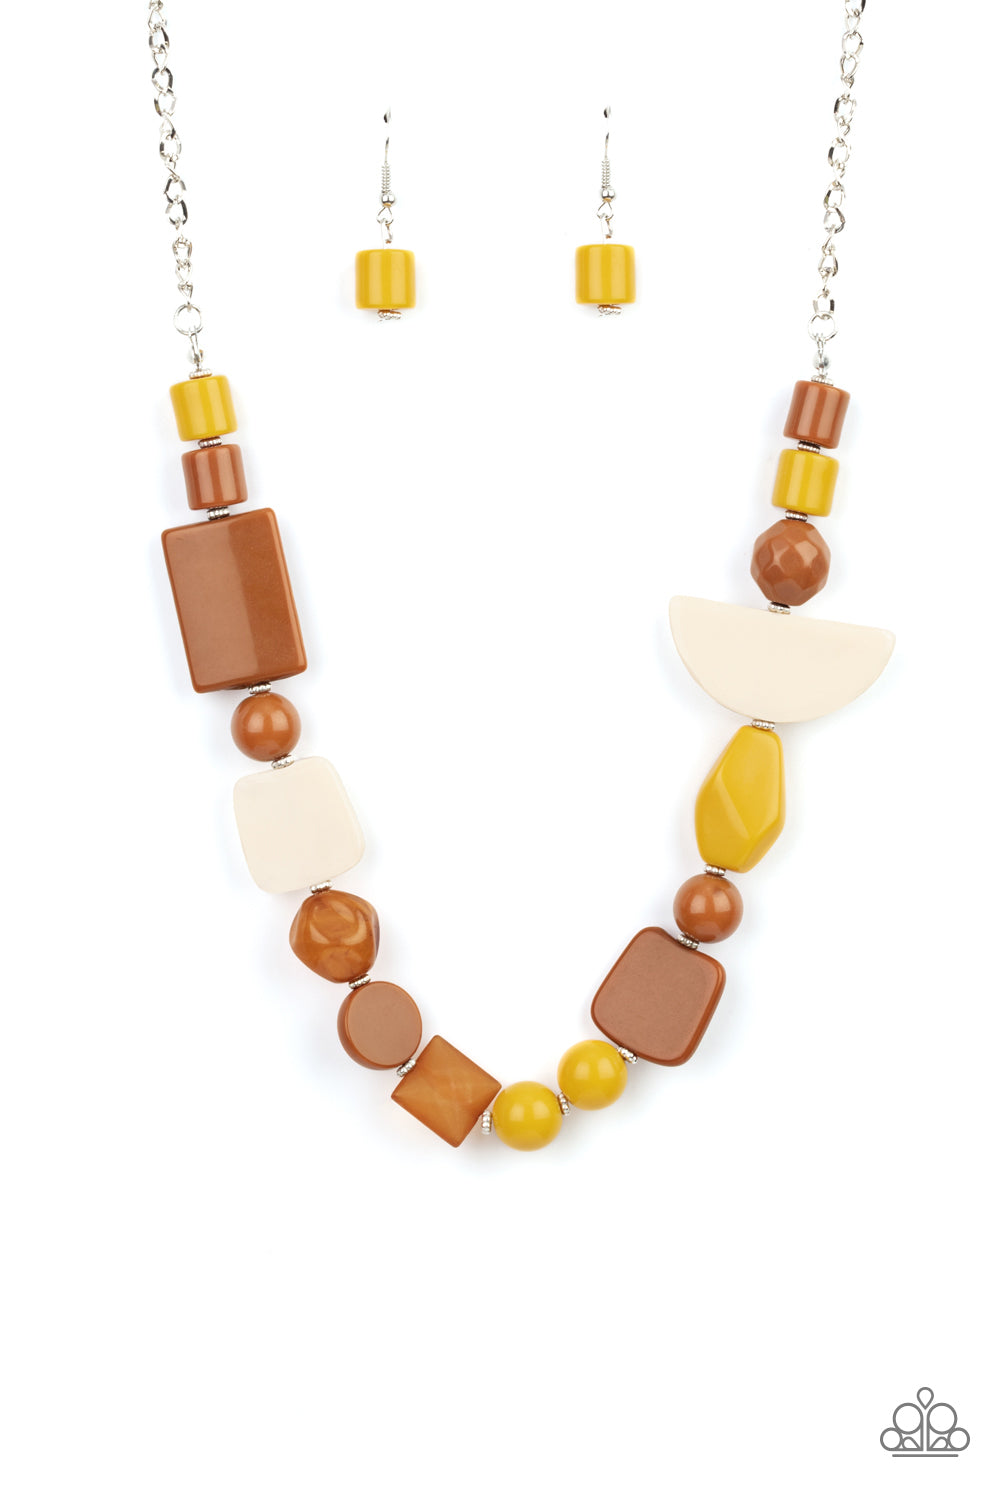 Tranquil Trendsetter Yellow Necklace - Paparazzi Accessories  Featuring the rustic hues of Adobe, Mustard, and Soybean, mismatched acrylic and faux rock beads are haphazardly threaded along an invisible wire below the collar for an abstract artisan vibe. Features an adjustable clasp closure.  All Paparazzi Accessories are lead free and nickel free!  Sold as one individual necklace. Includes one pair of matching earrings.